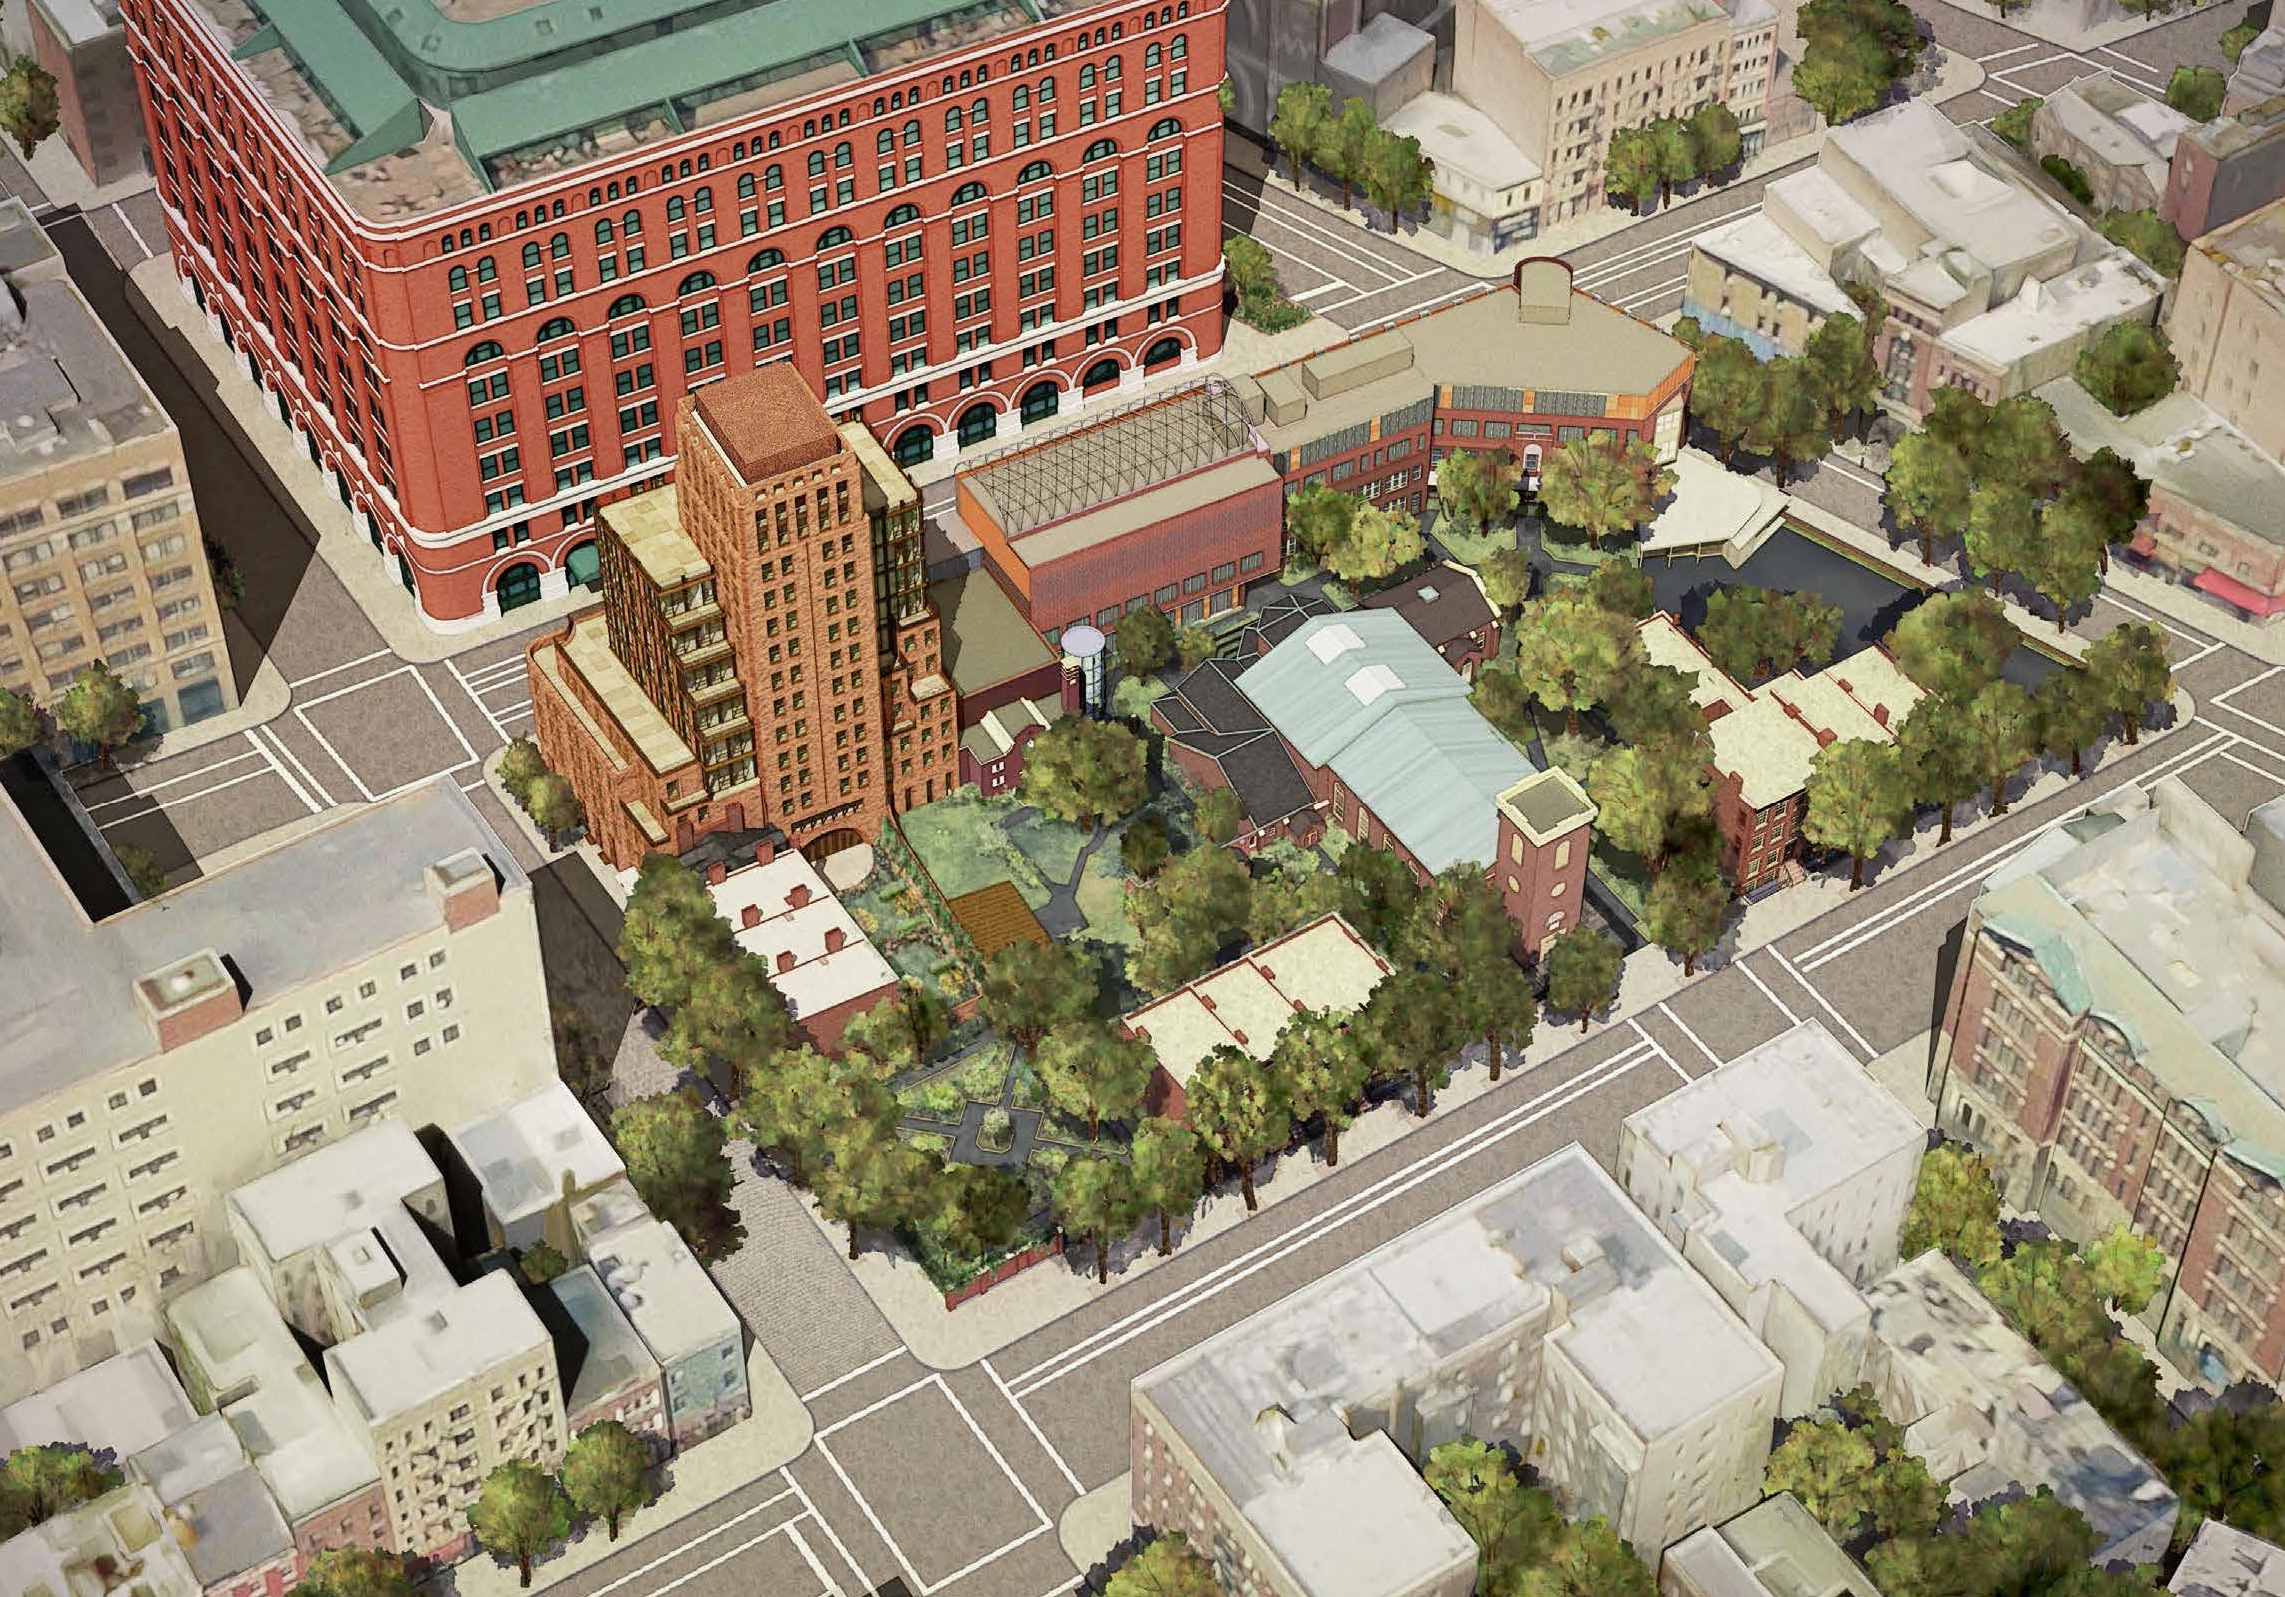 An aerial view of the St. Luke's block showing a rendering of the new "Barrow St. Apartments" at the southwest corner, plus two stories added atop the St. Luke's School.  Courtesy Barry Rice Architect